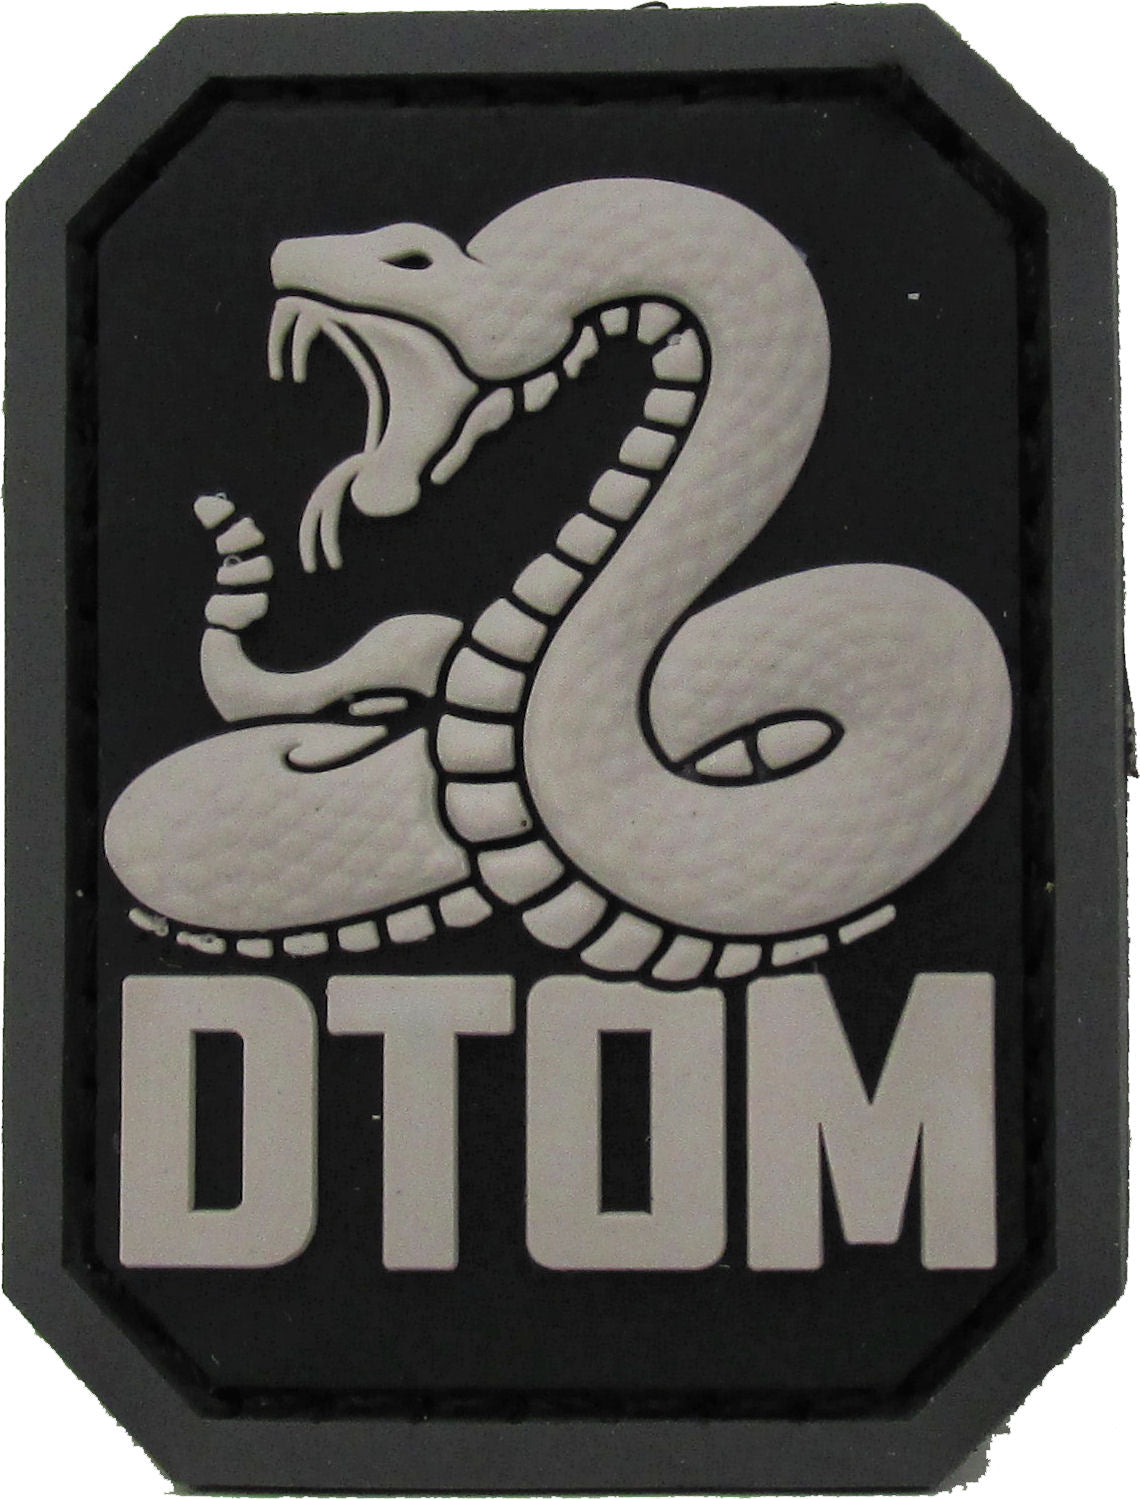 VELCRO® BRAND Fastener Morale HOOK Gadsden DTOM Don't Tread On Me Patches  3x2